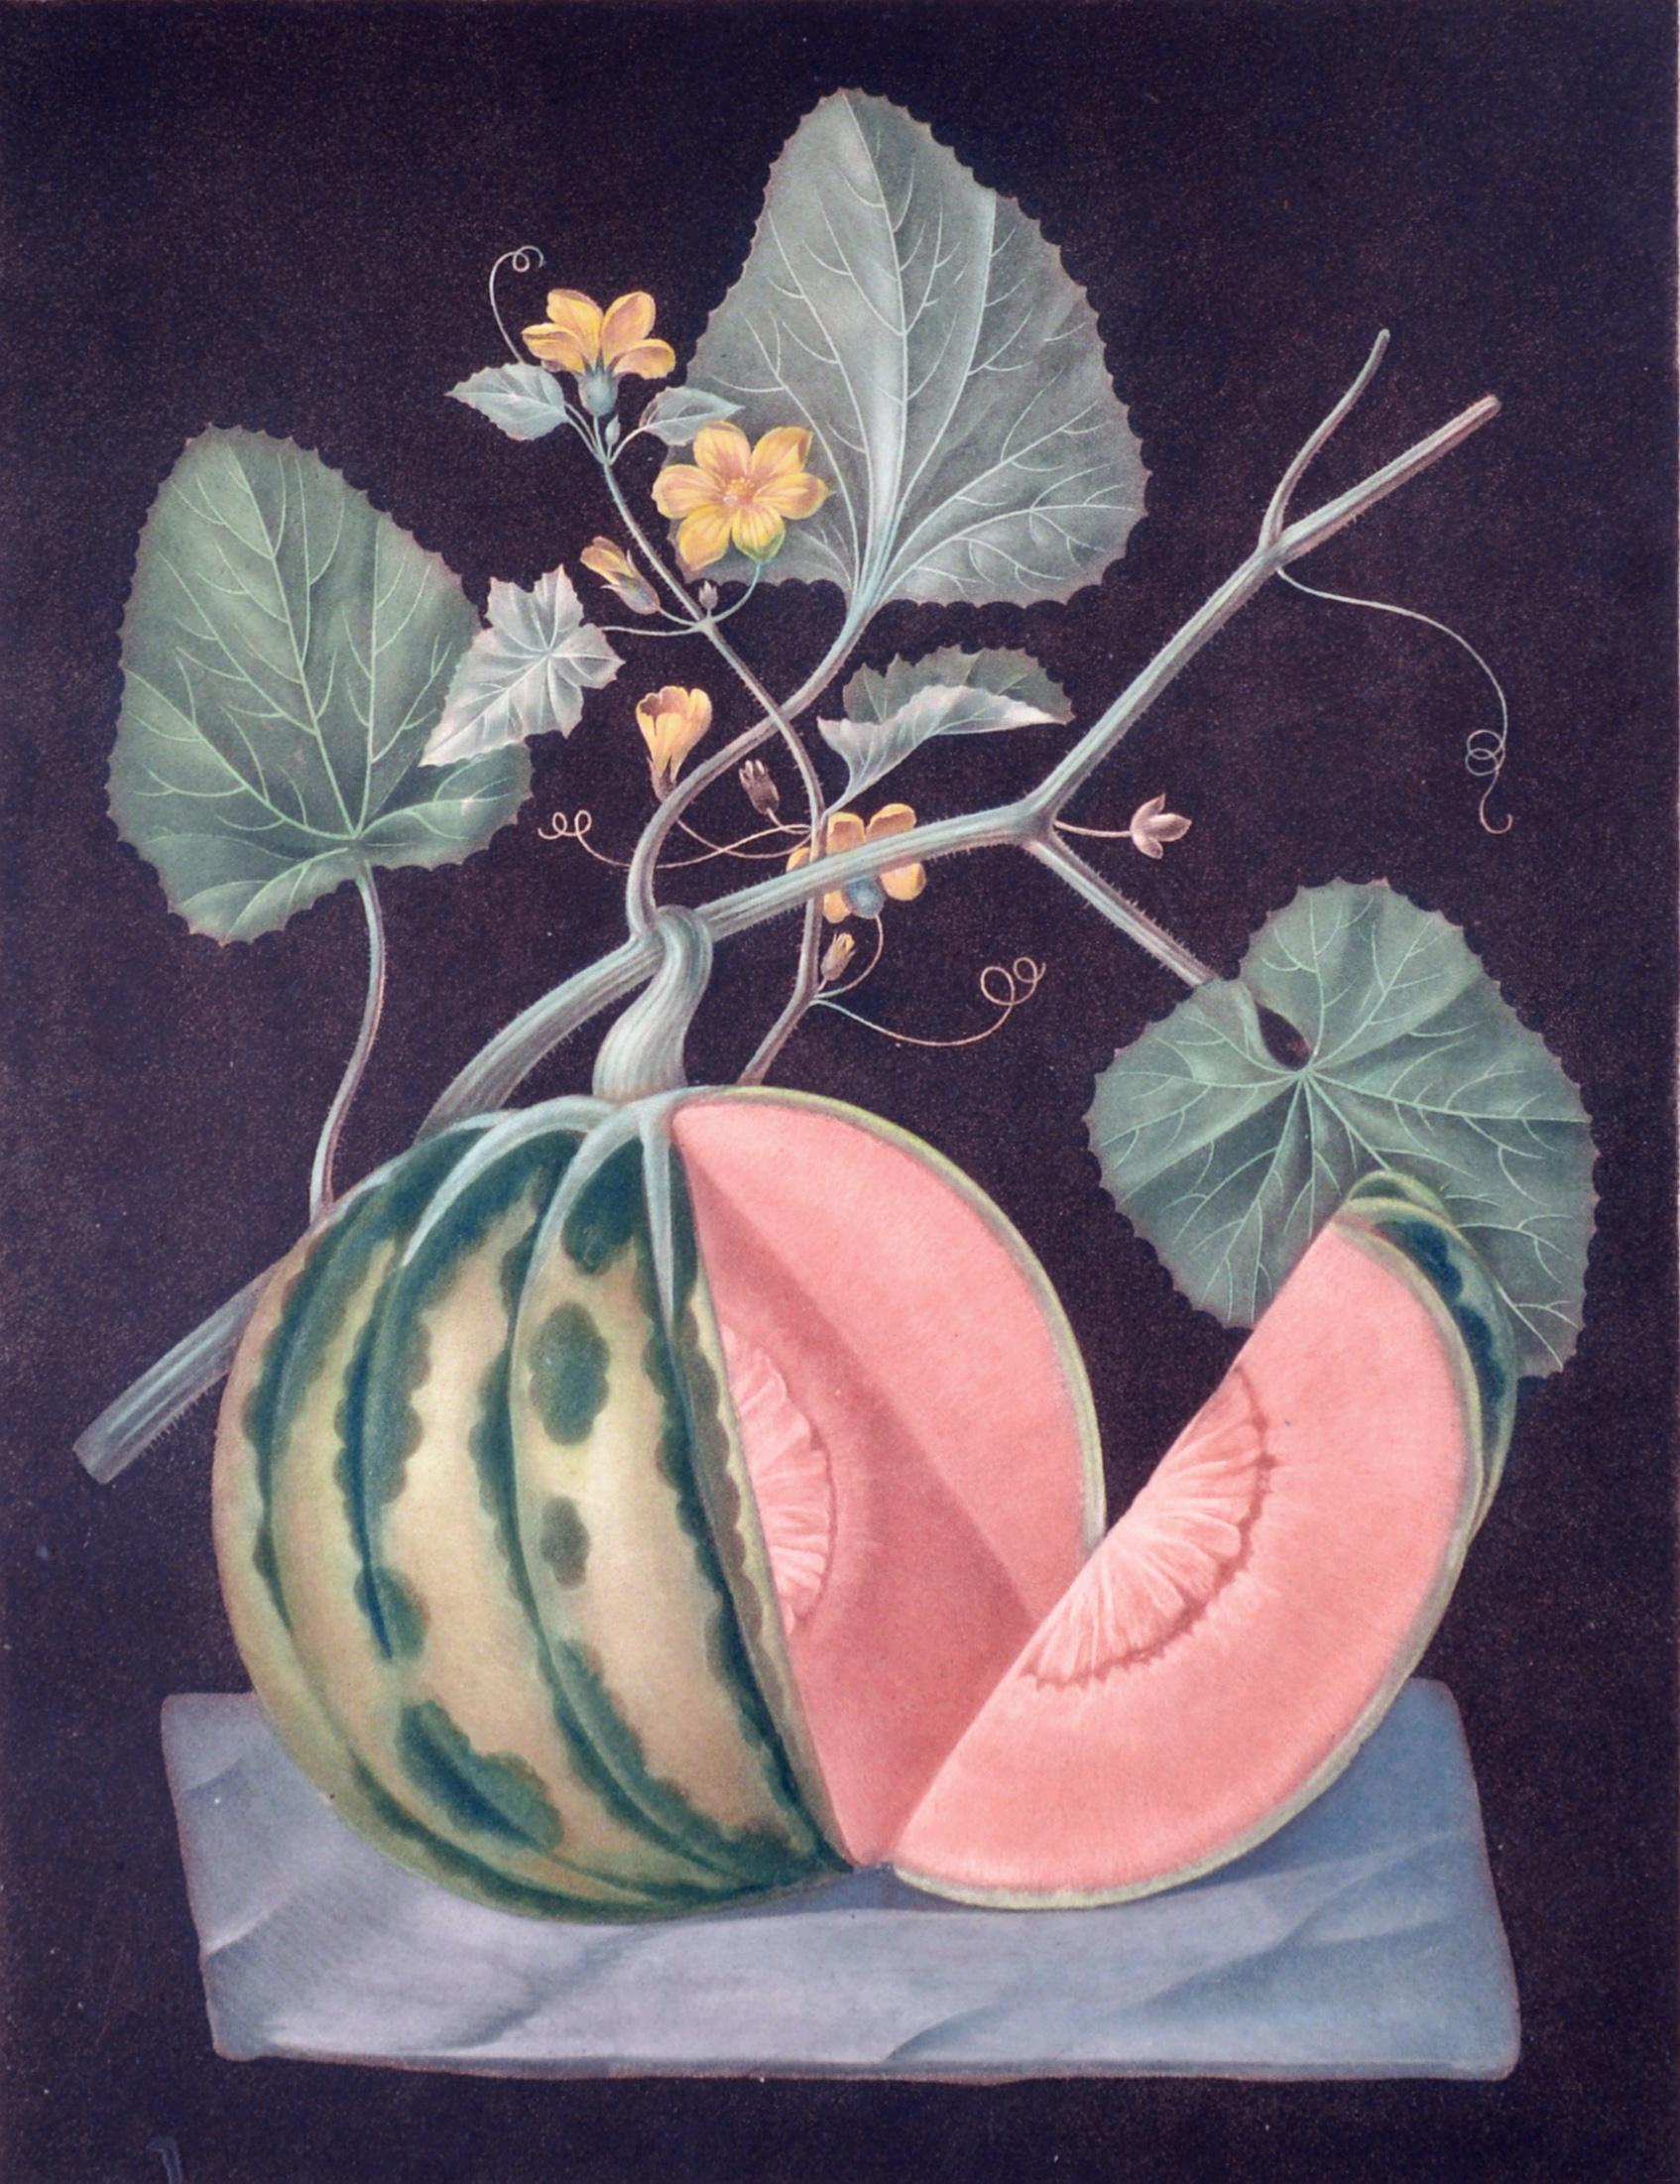 george brookshaw Engraving of A Melon,
Plate LXVIII, Polinac,
From 'Pomona Britannica, or, A Collection of the Most Esteemed Fruits',
circa 1812.


This aquatint engraving, with some stipple, was printed in color and finished by hand and with